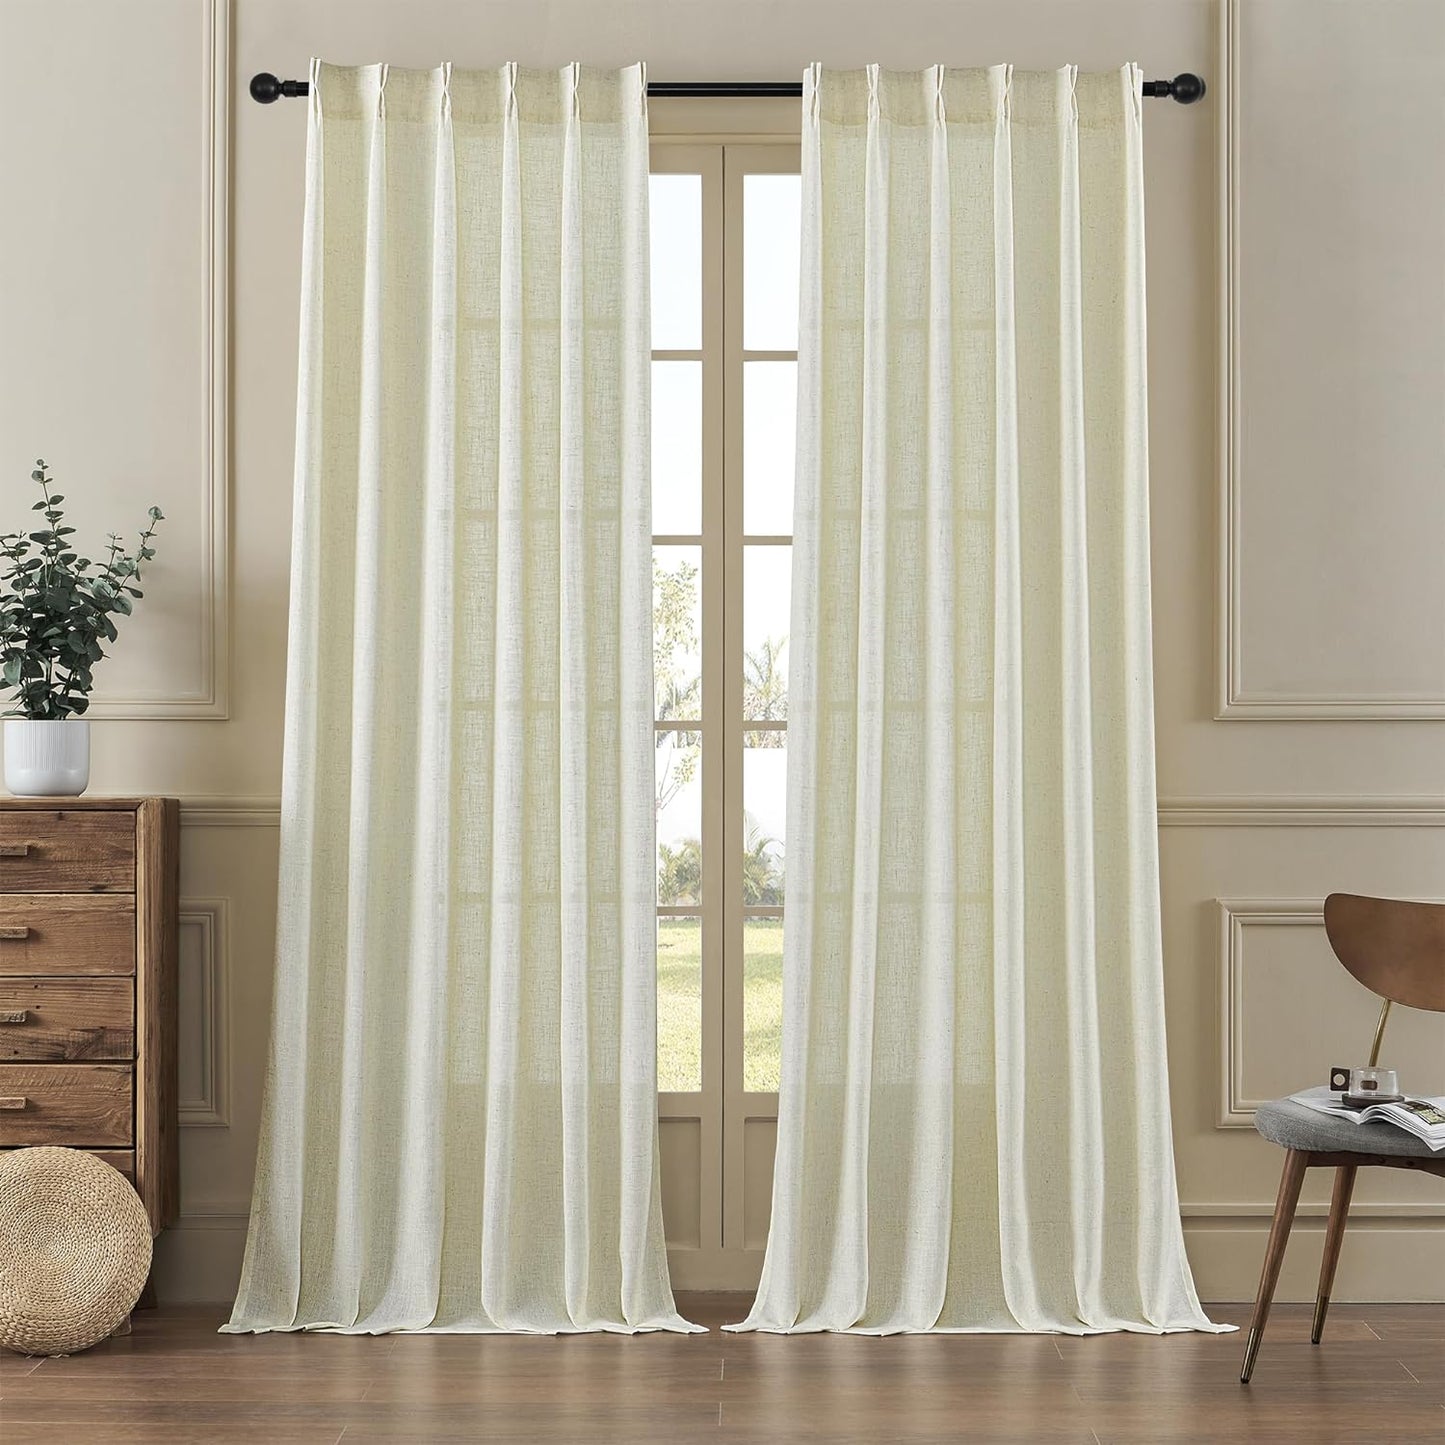 MASWOND White Pinch Pleated Curtains 90 Inches Long 2 Panels for Living Room Semi Sheer Linen Curtains Pinch Pleat Drapes for Traverse Rod Light Filtering Curtains for Dining Bedroom W38Xl90 Length  MASWOND Linen 38X90 